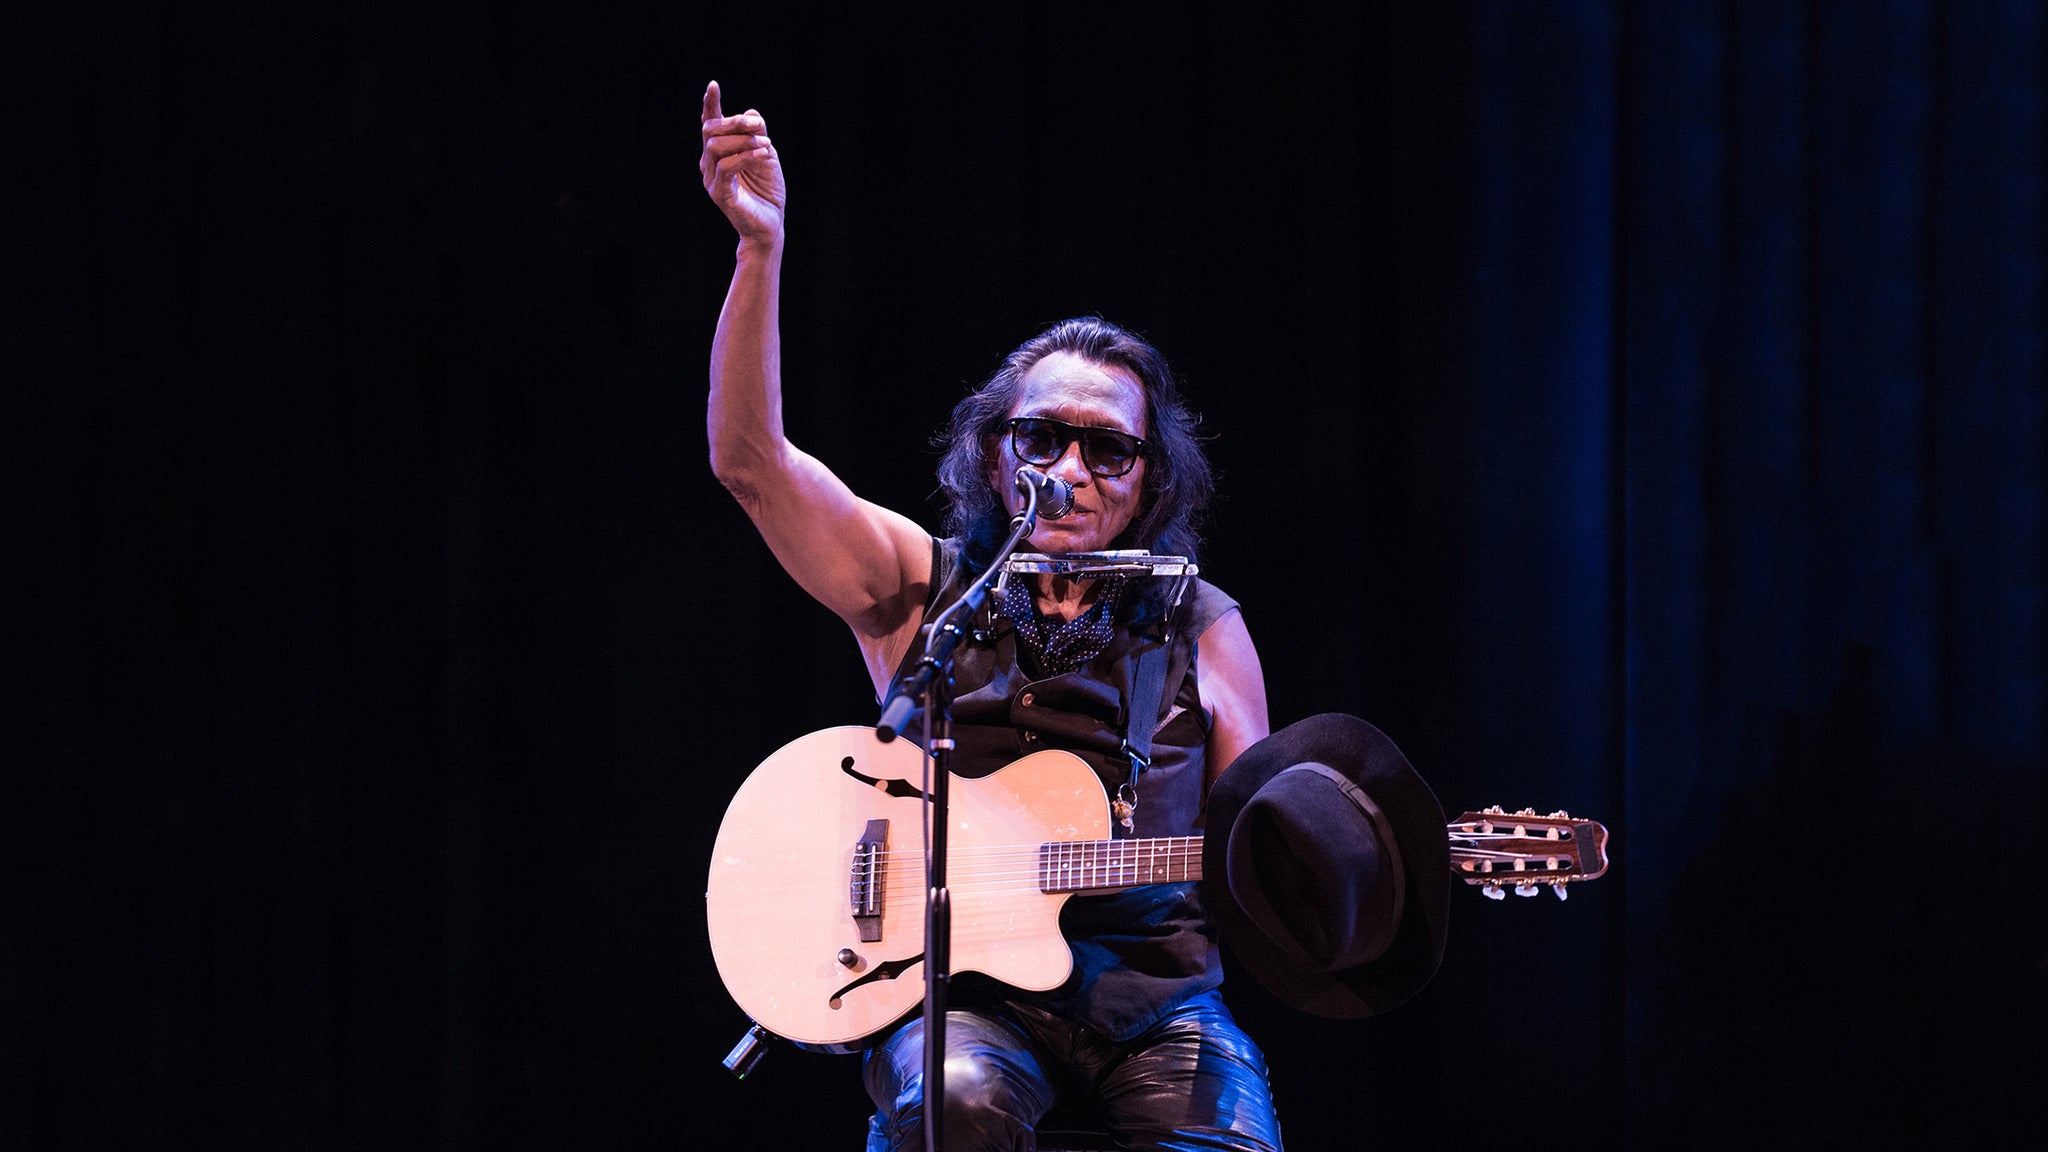 Rodriguez in Vancouver event information